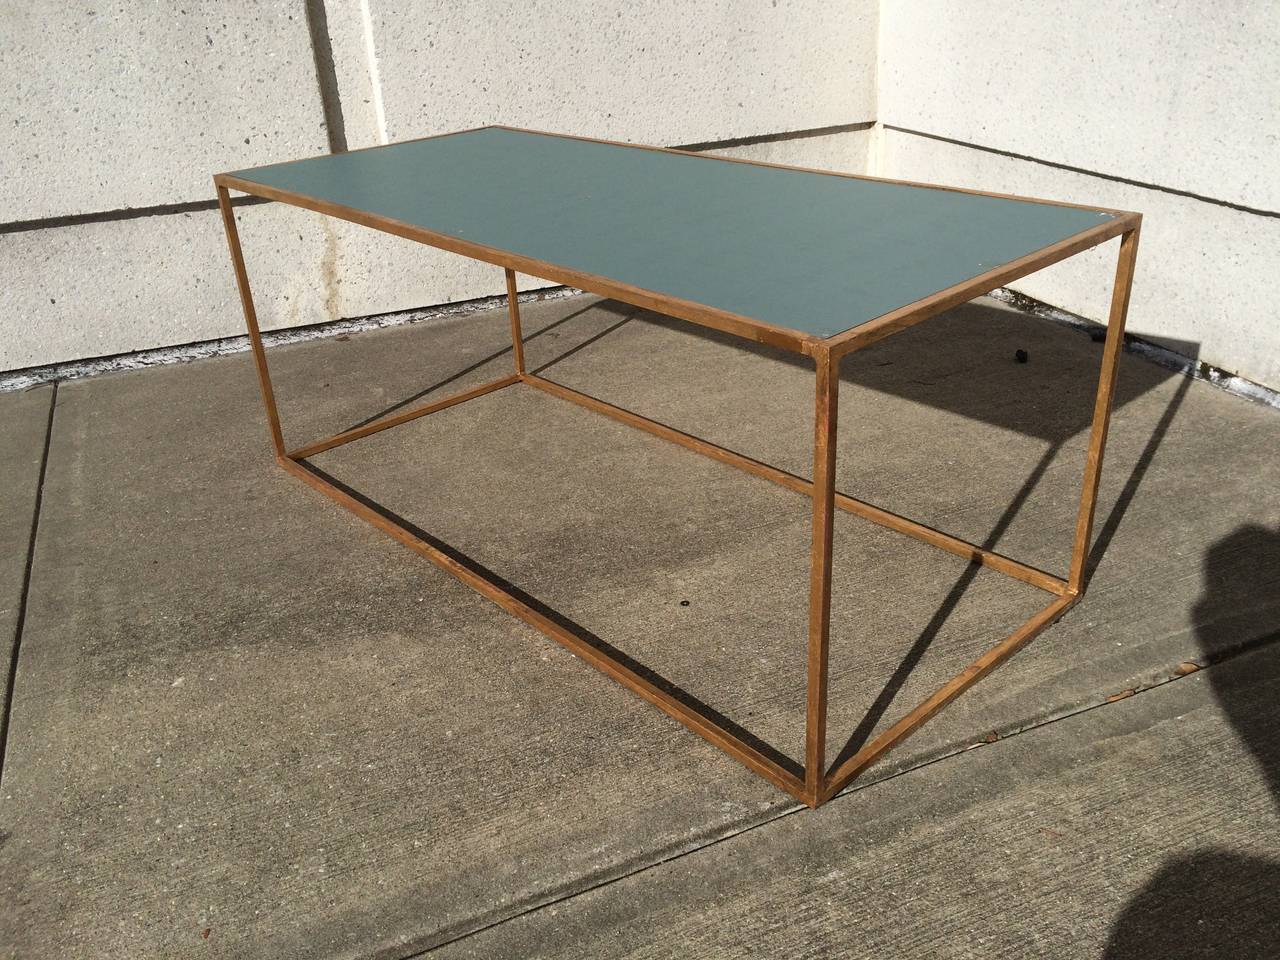 French modern gilt iron coffee table of geometric form with glass mirror top.